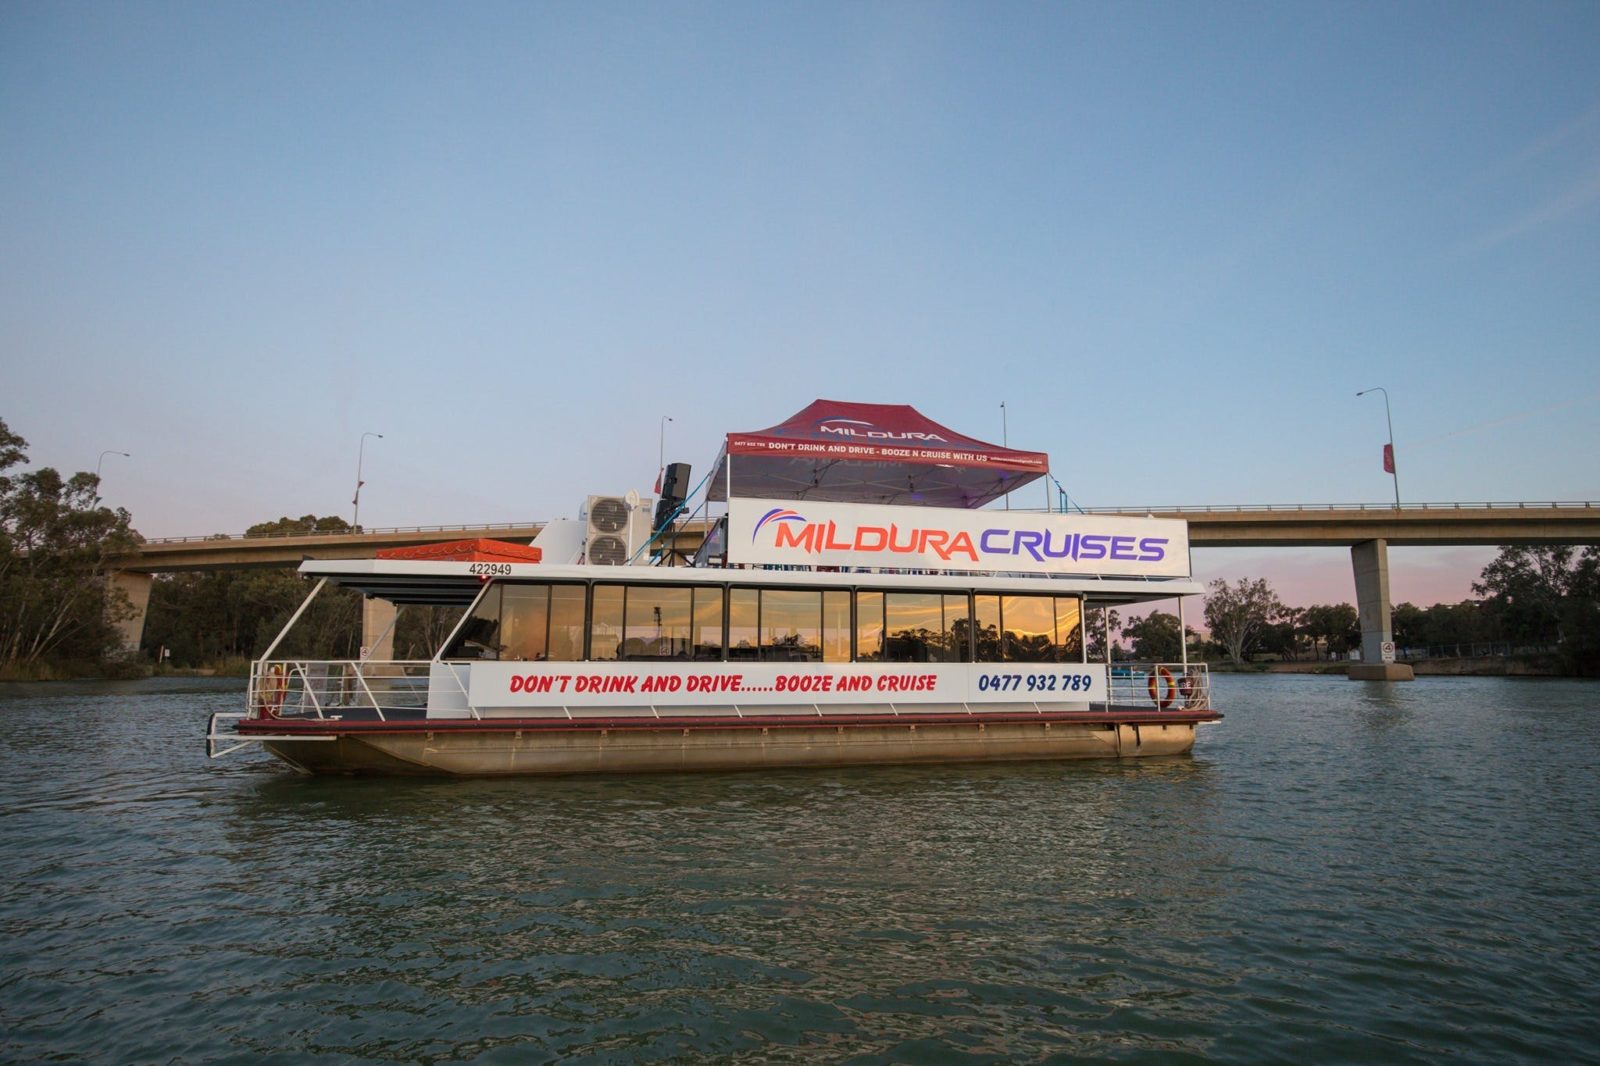 Riverqueen on the Murray